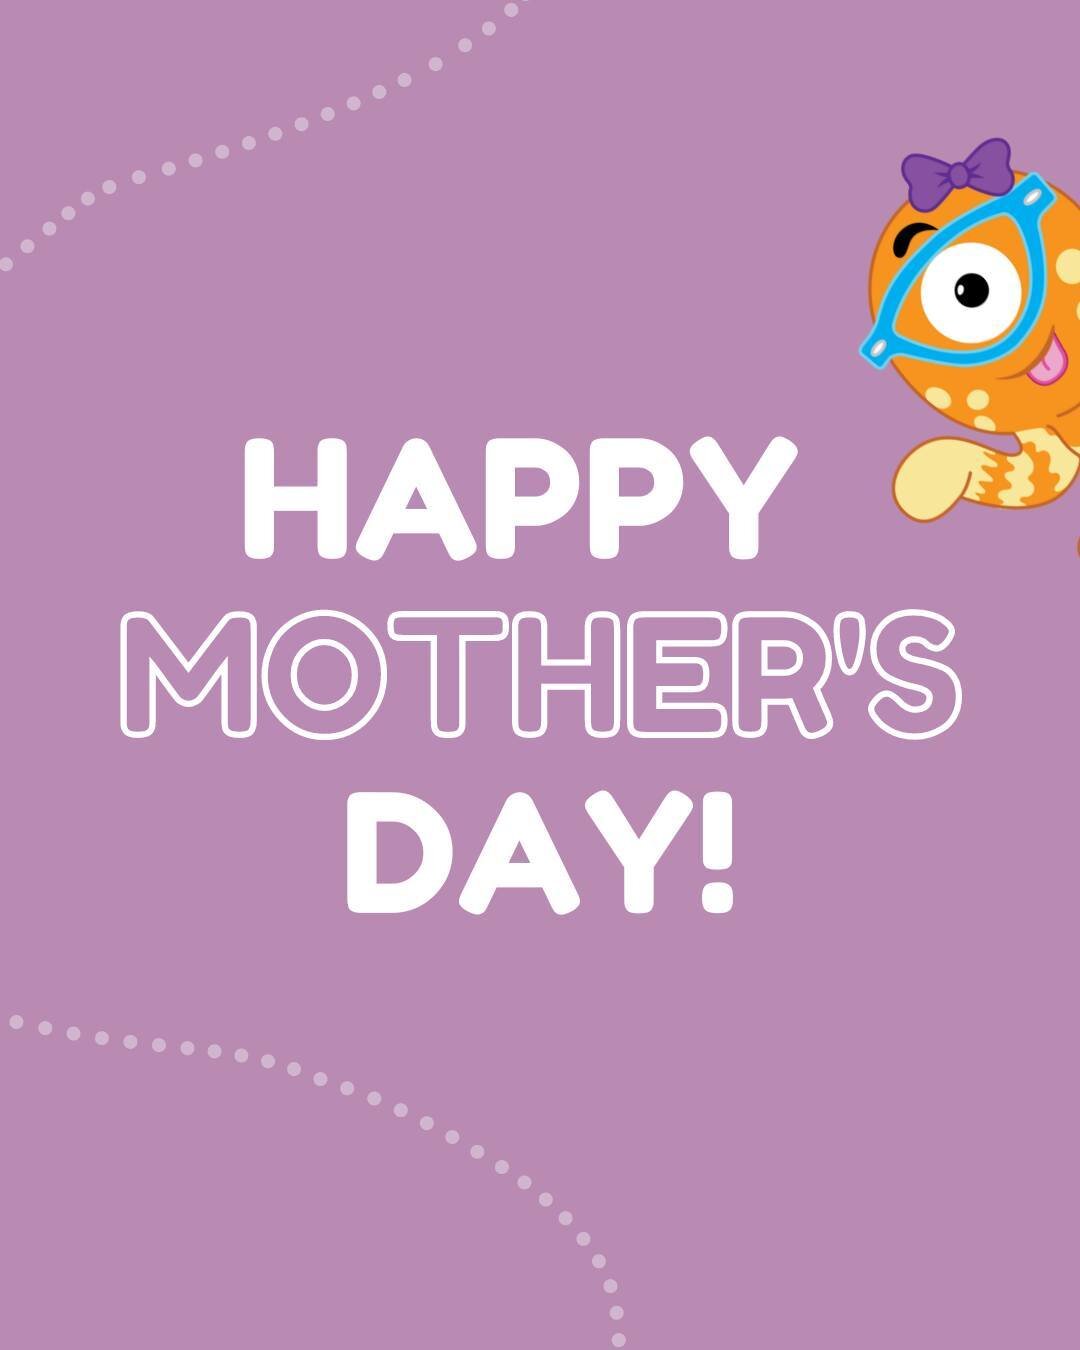 Happy Mother's Day to all the FUN-tastic mums out there! ✨⁠
⁠
We want to say a massive thank you to all our superhero mother figures! From letting our imaginations soar and being our #1 playtime buddy - we can't thank our mums enough! You all deserve